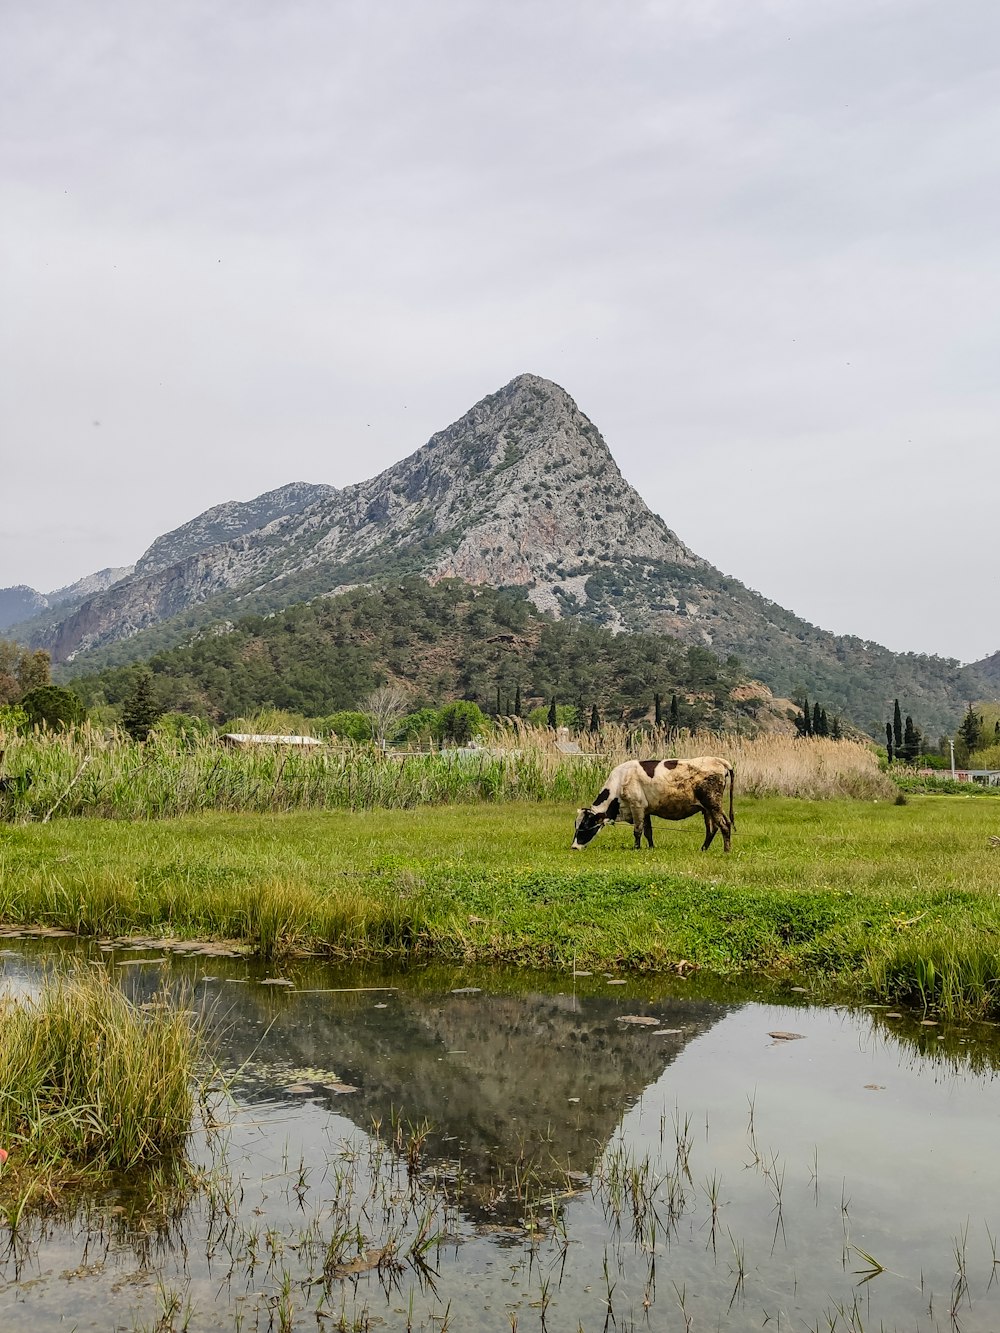 a cow grazing in a field with a mountain in the background